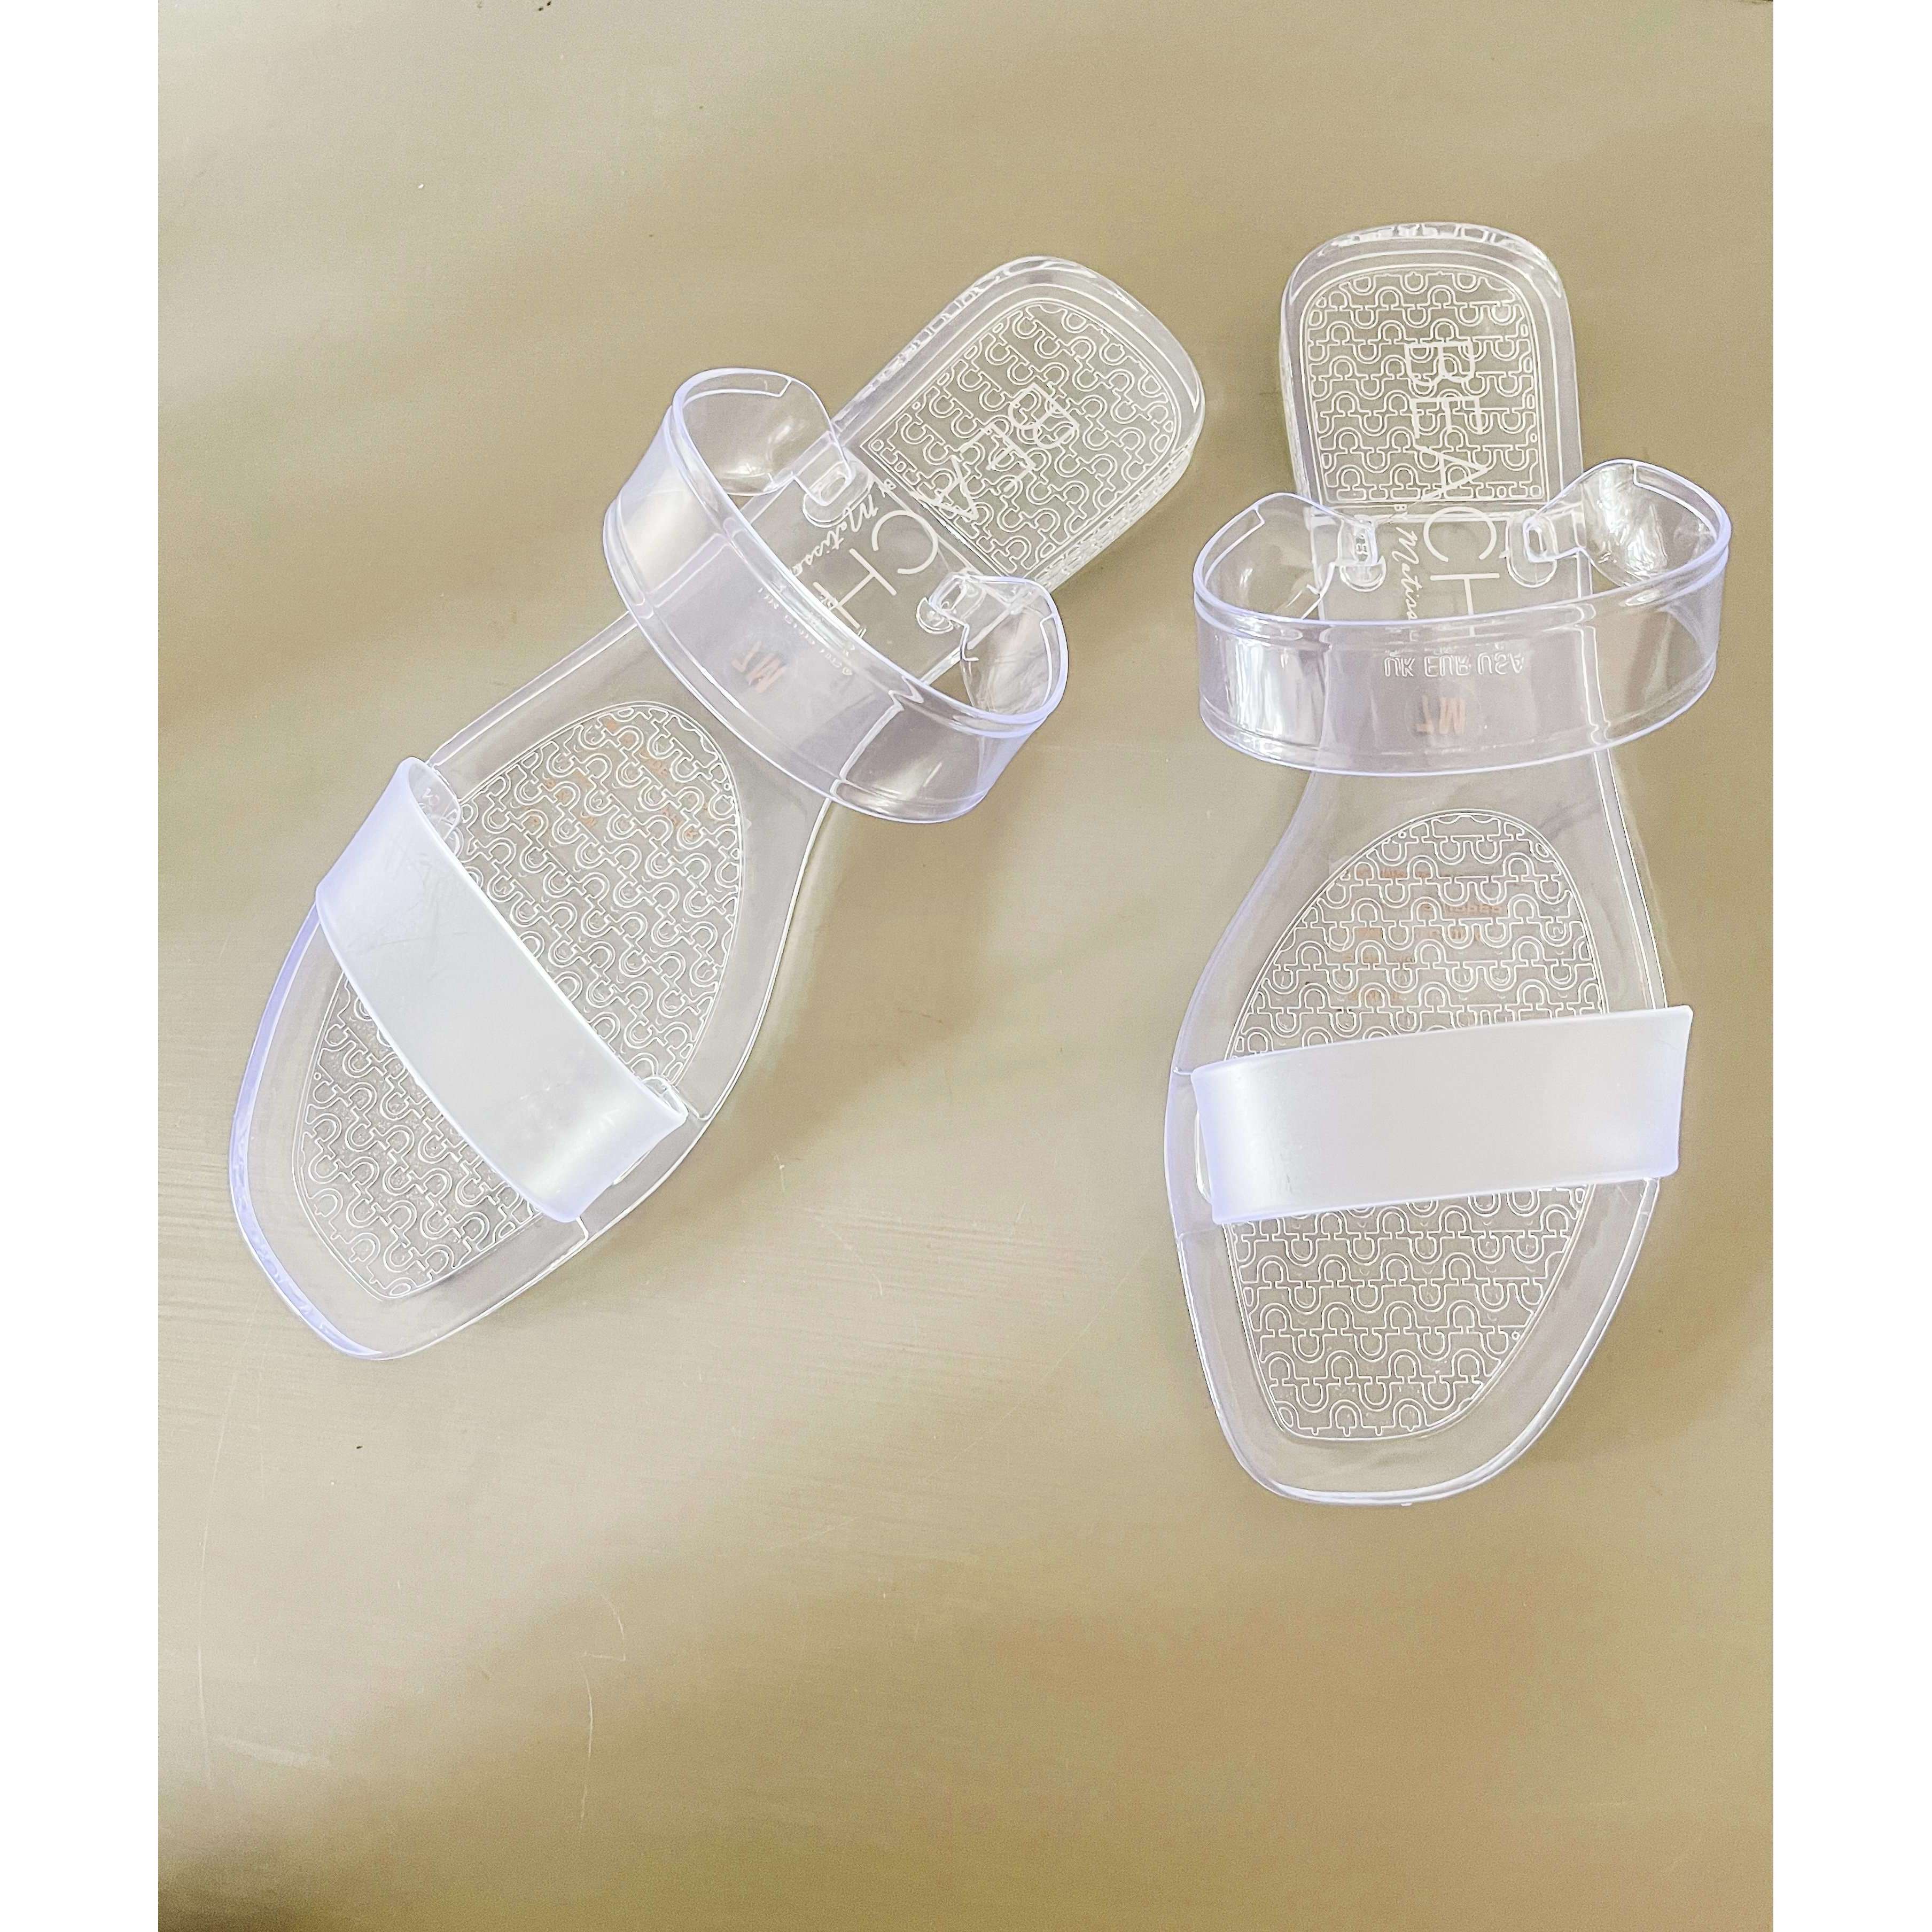 8.28 Boutique:Coconuts by Matisse,Coconuts by Matisse Drift Jelly Sandal in Clear,Shoes